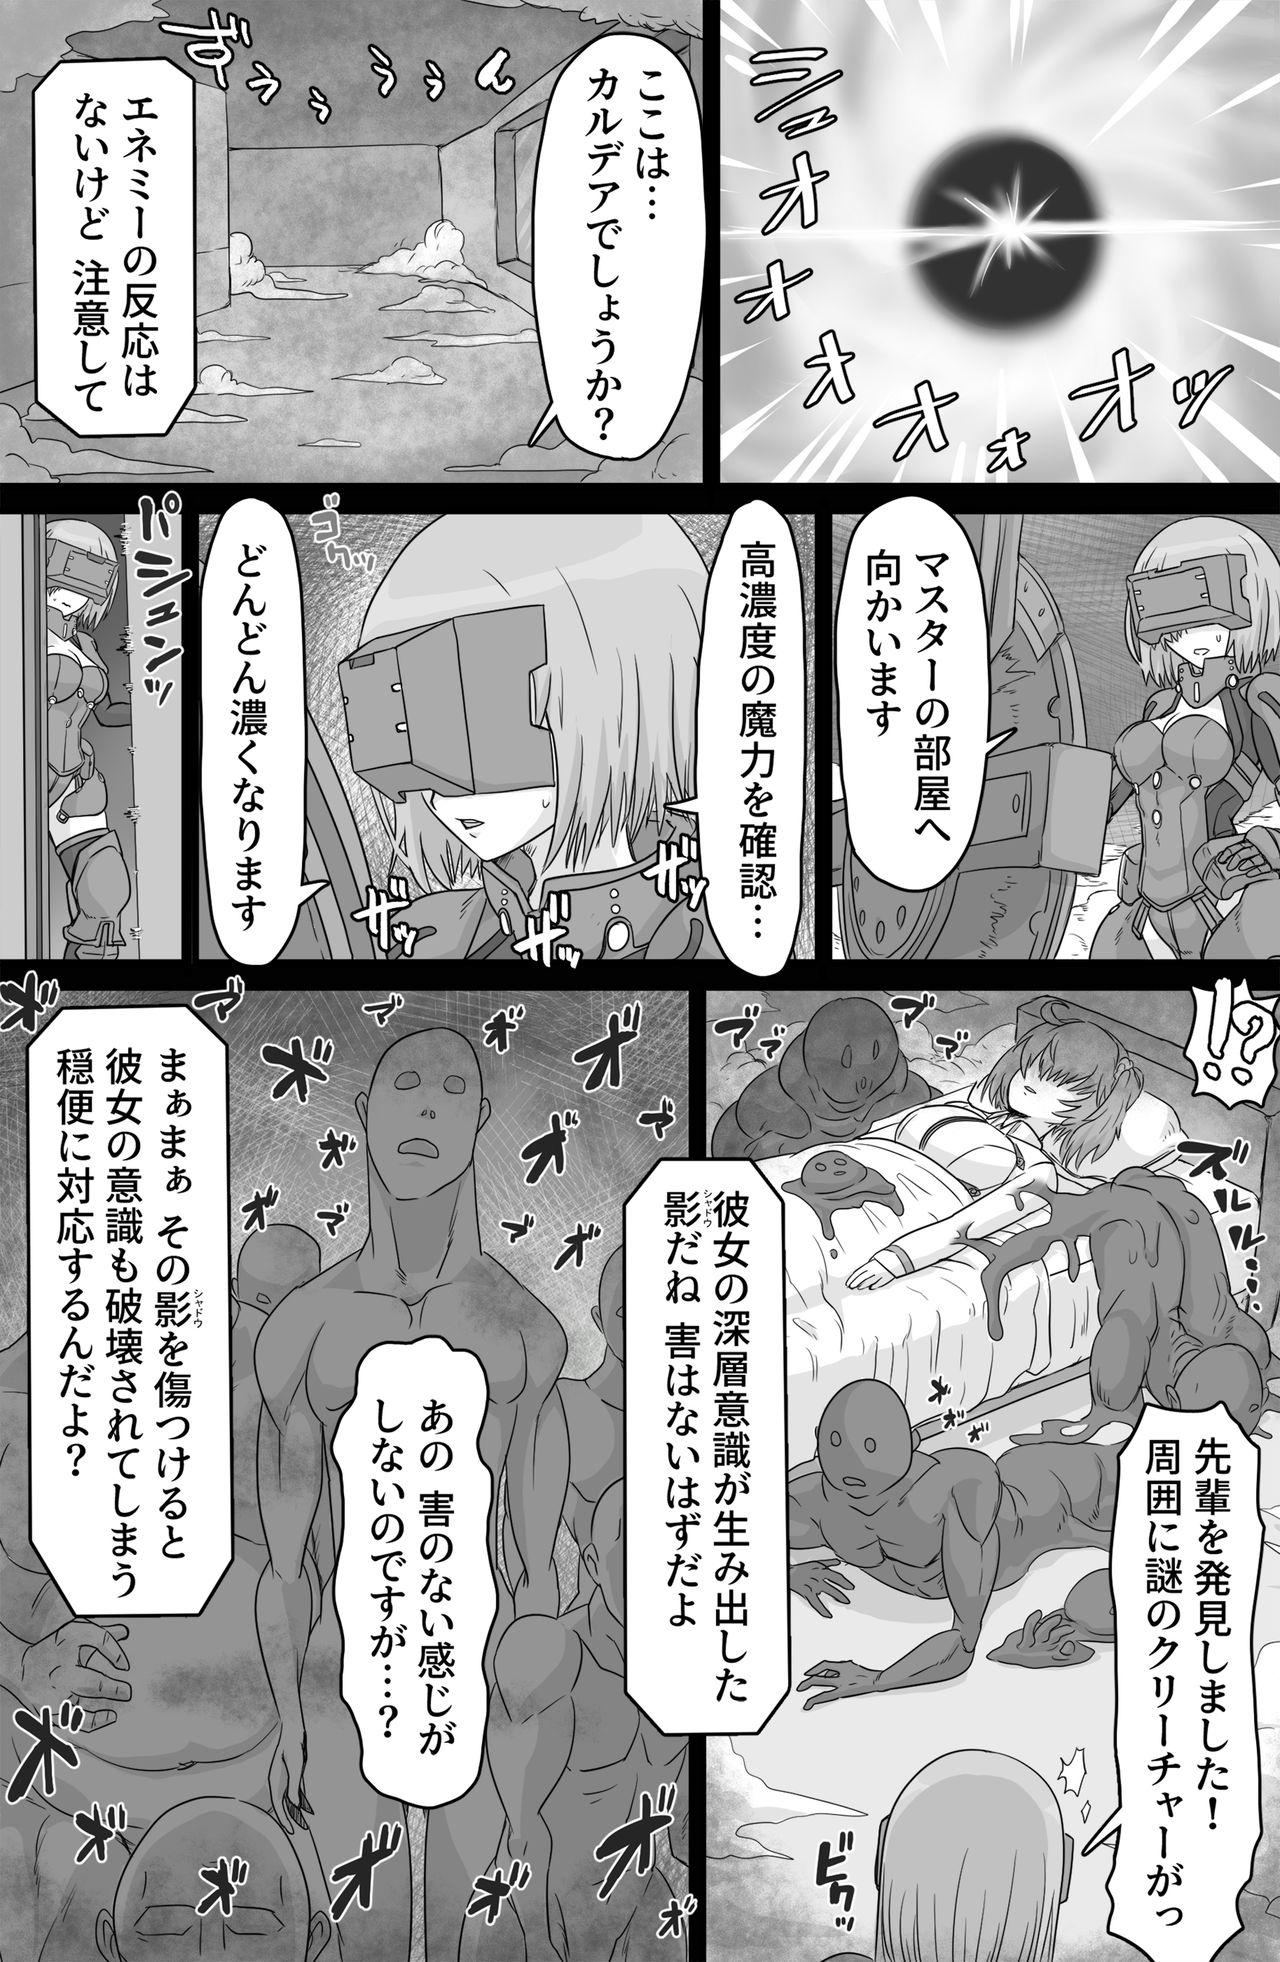 Gaysex Shadow Bind - Fate grand order Sextape - Page 3